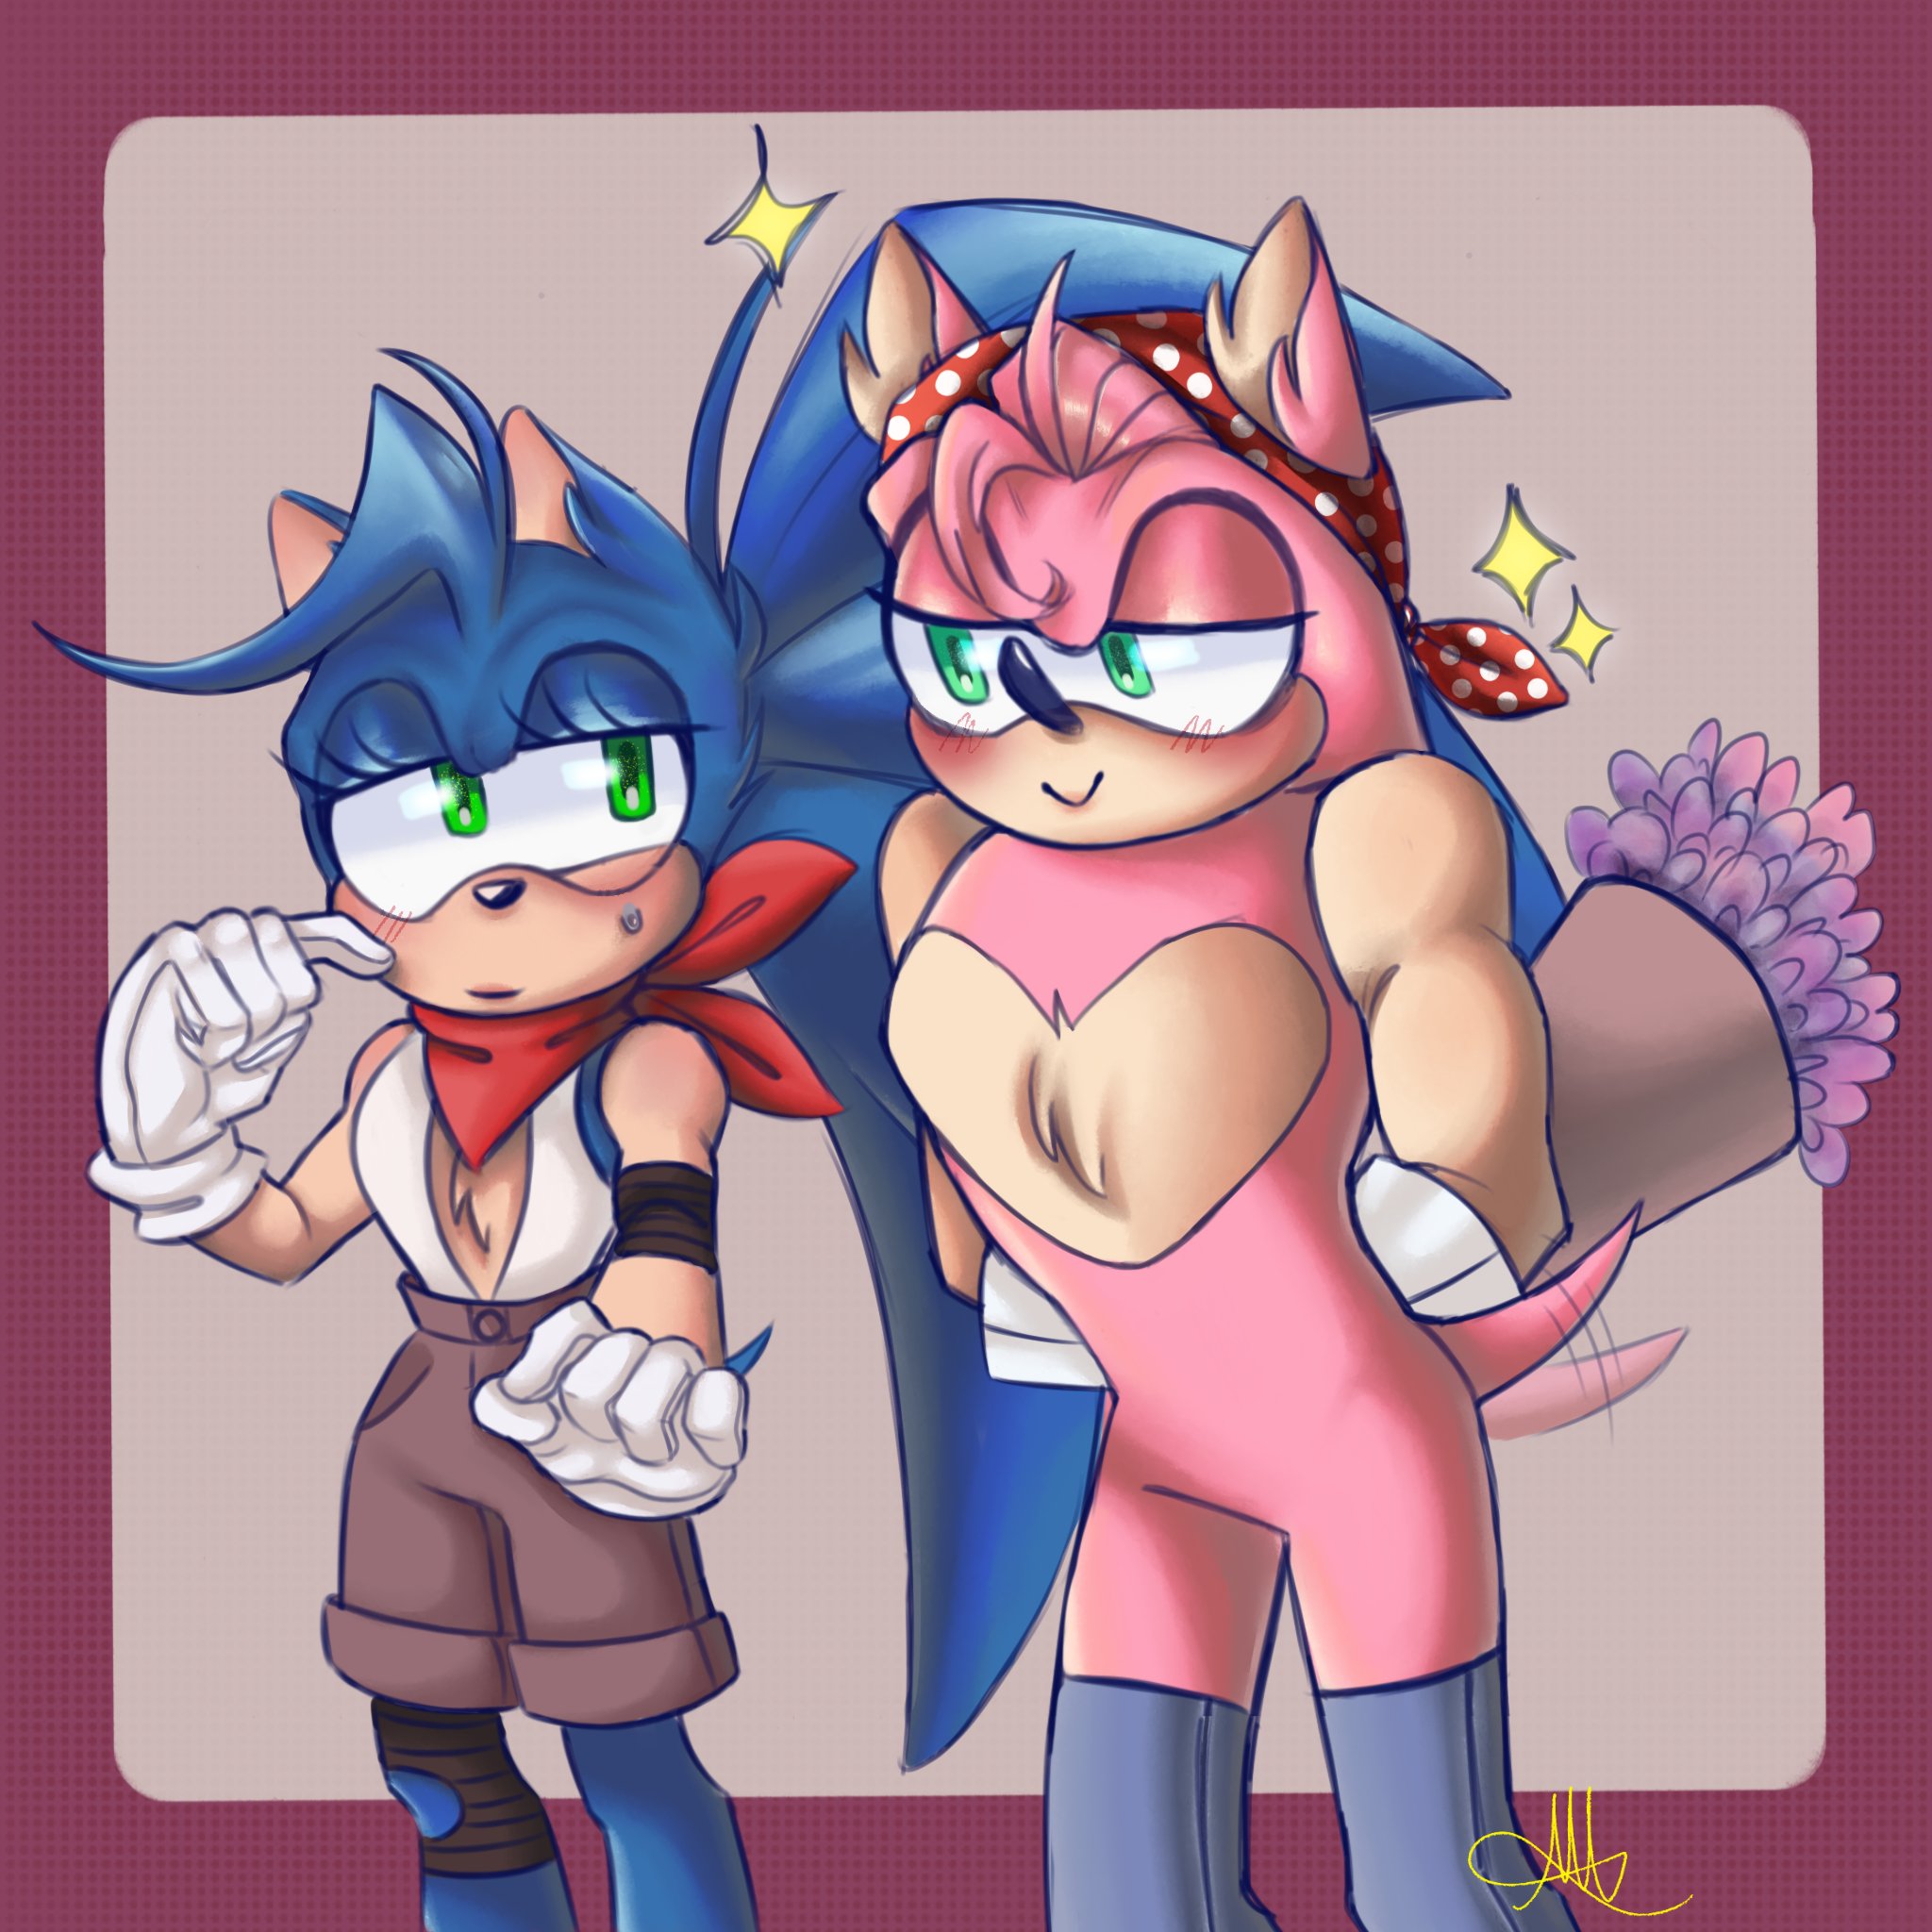 Project: Sonamy on X: We're back with some more sonamy requests